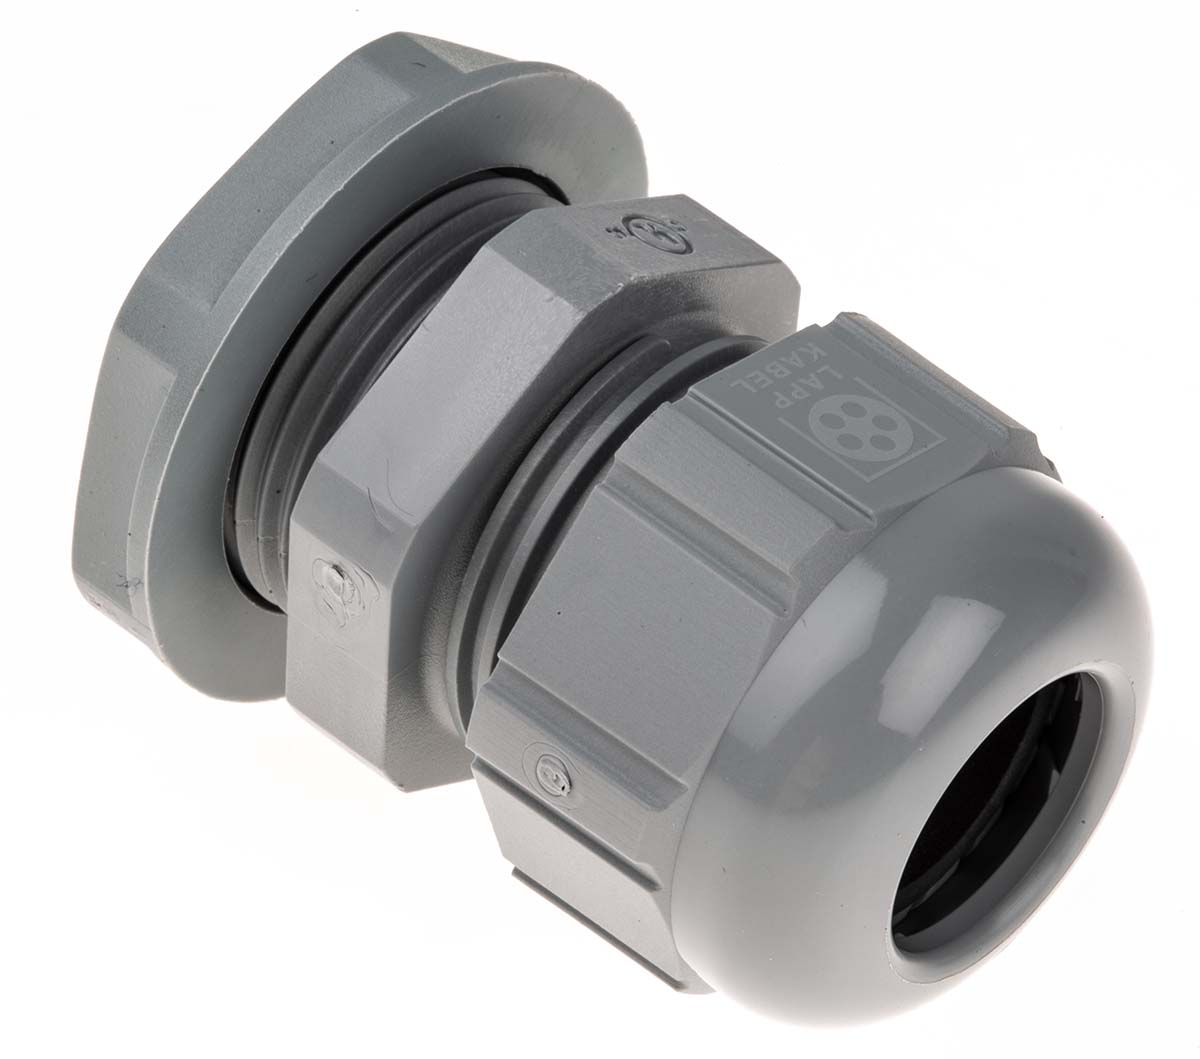 Lapp SKINTOP Series Grey Polyamide Cable Gland, PG16 Thread, 9mm Min, 14mm Max, IP68